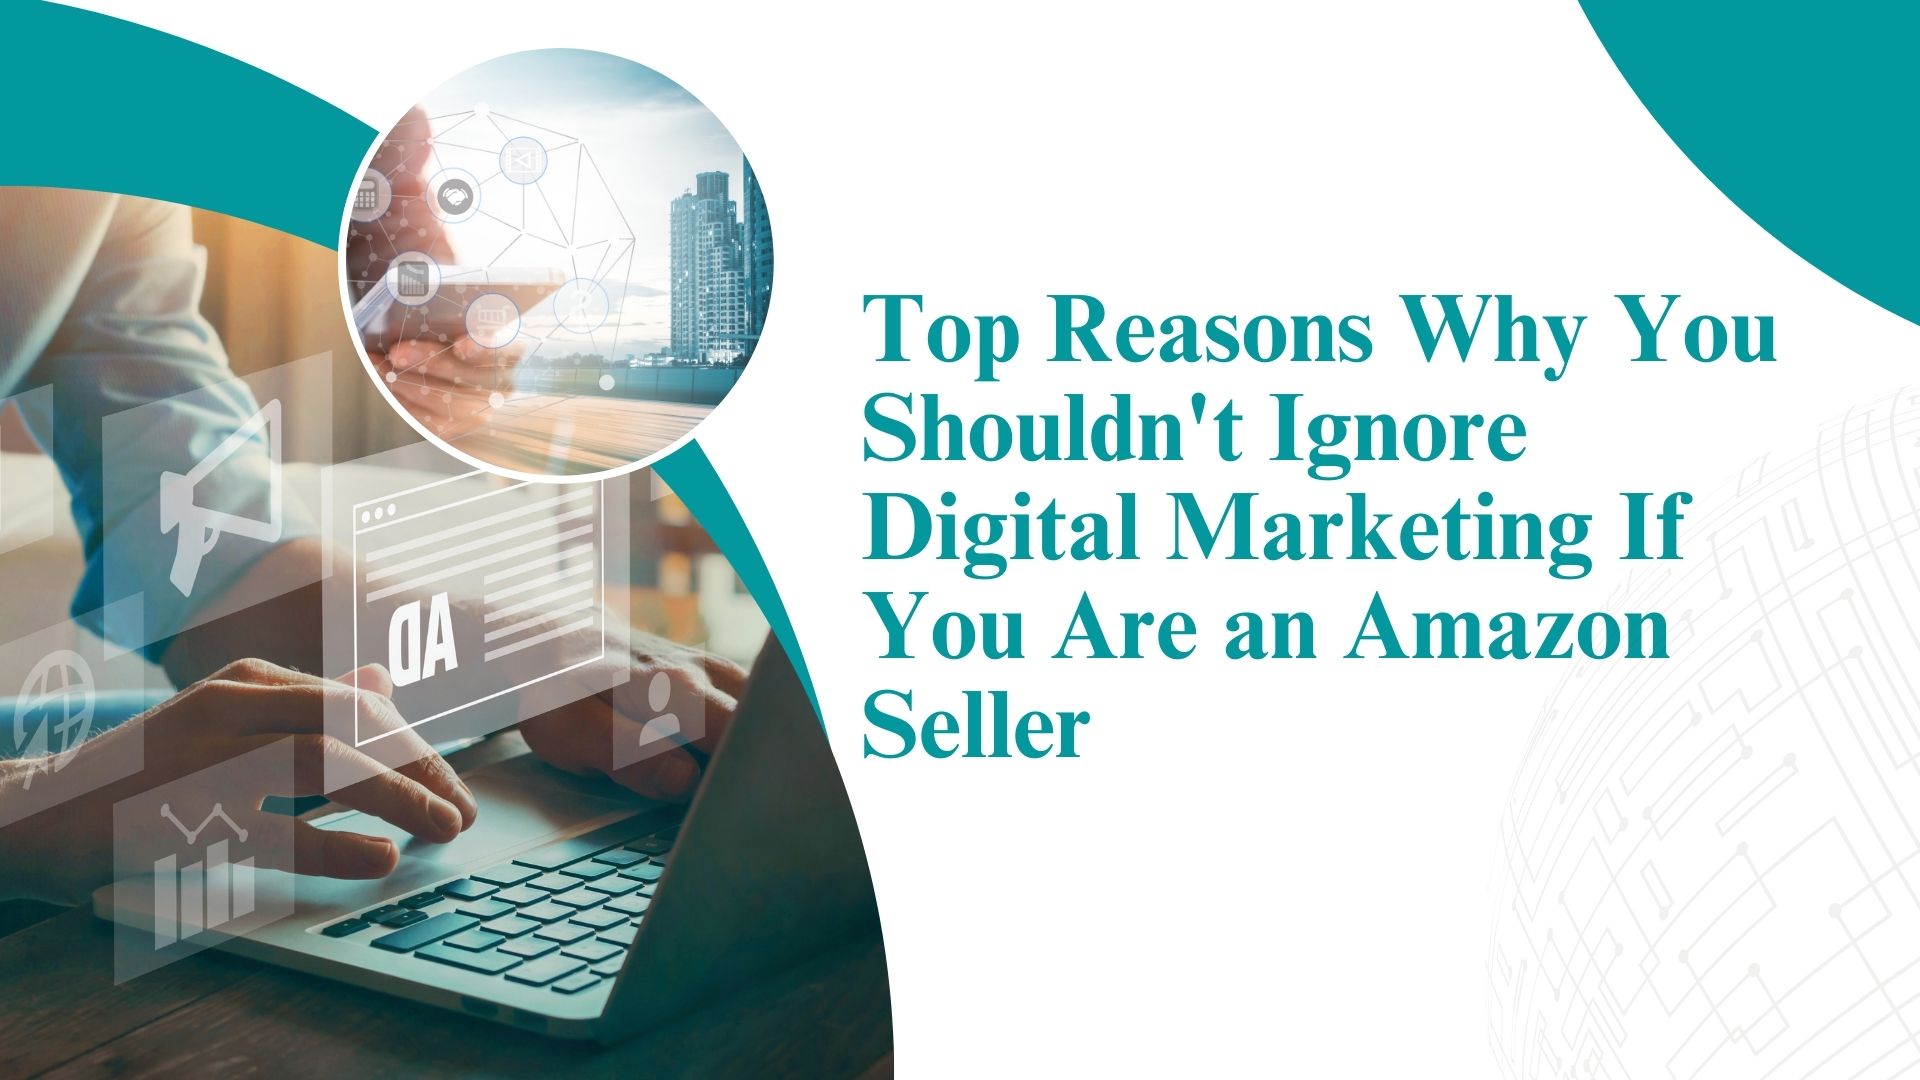 Top Reasons Why You Shouldn't Ignore Digital Marketing If You Are an Amazon Seller